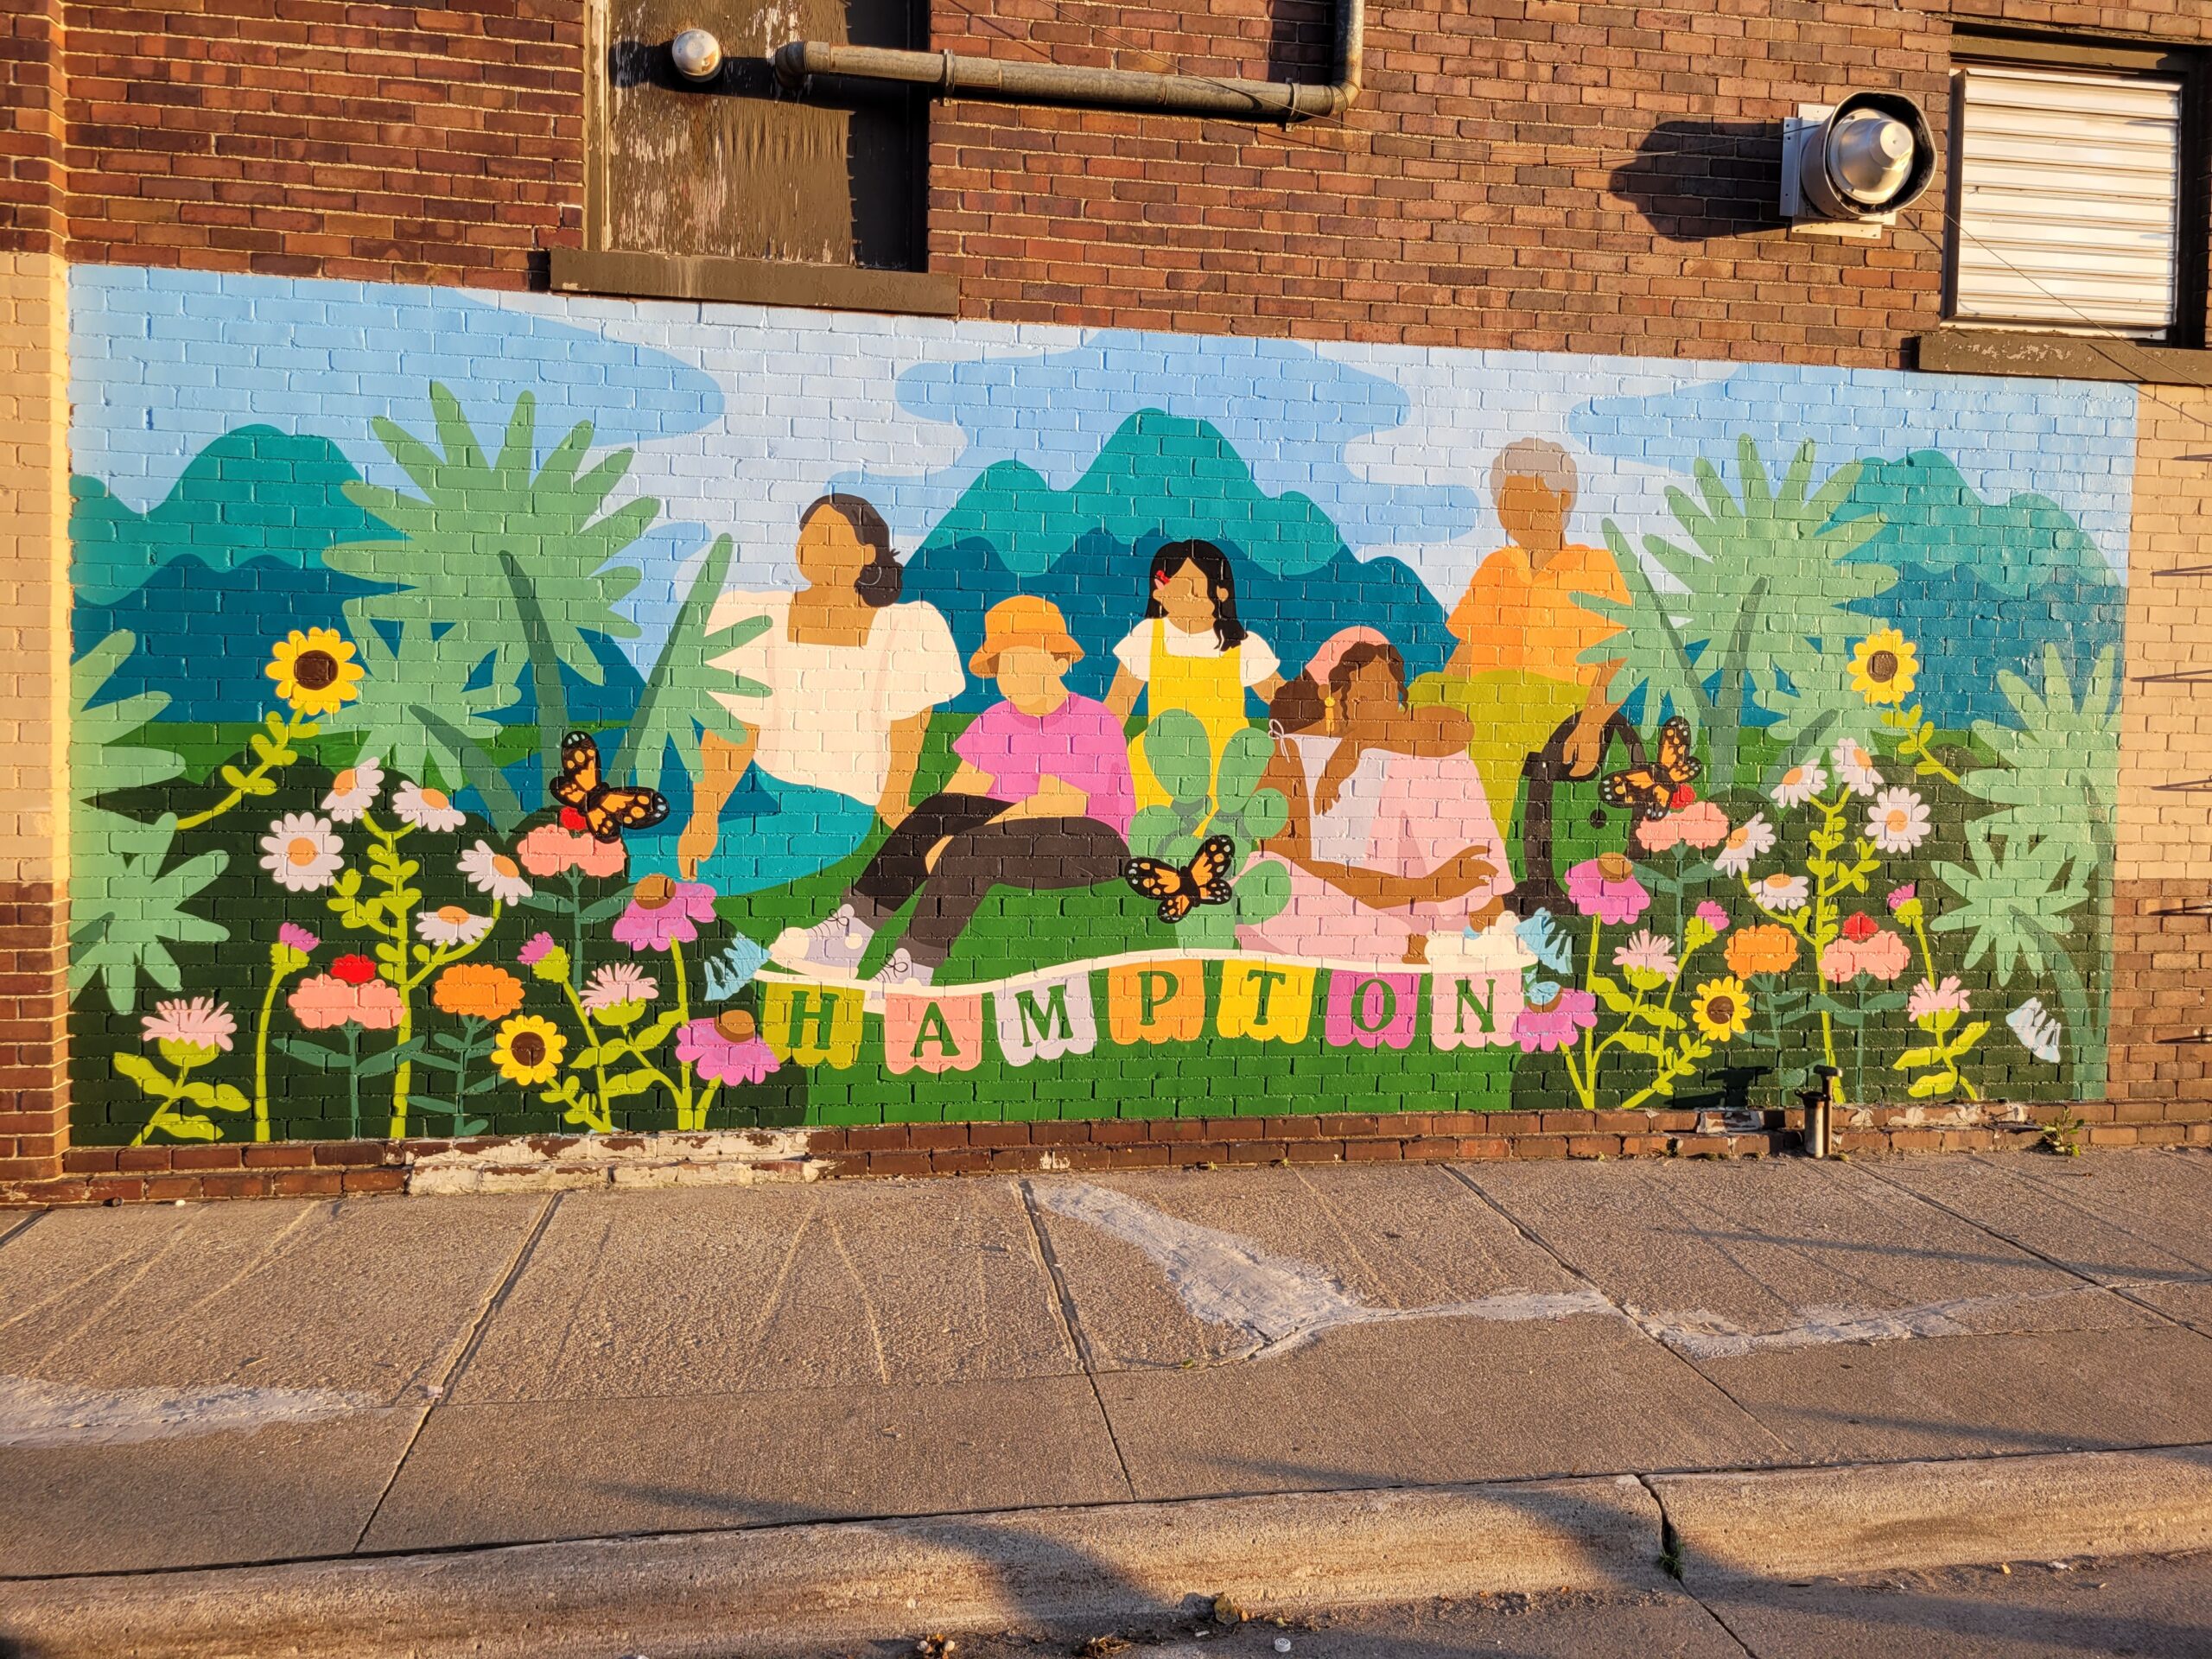 A mural showing people and beautiful flora.